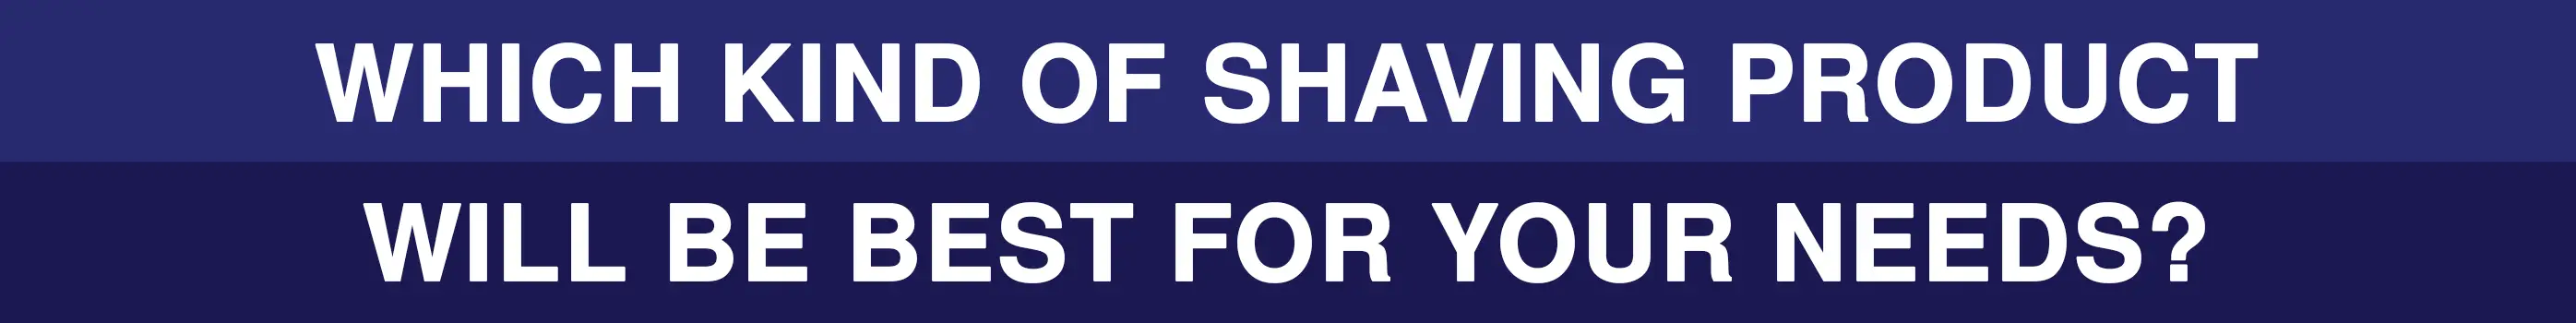 Which kind of shaving product is best for you